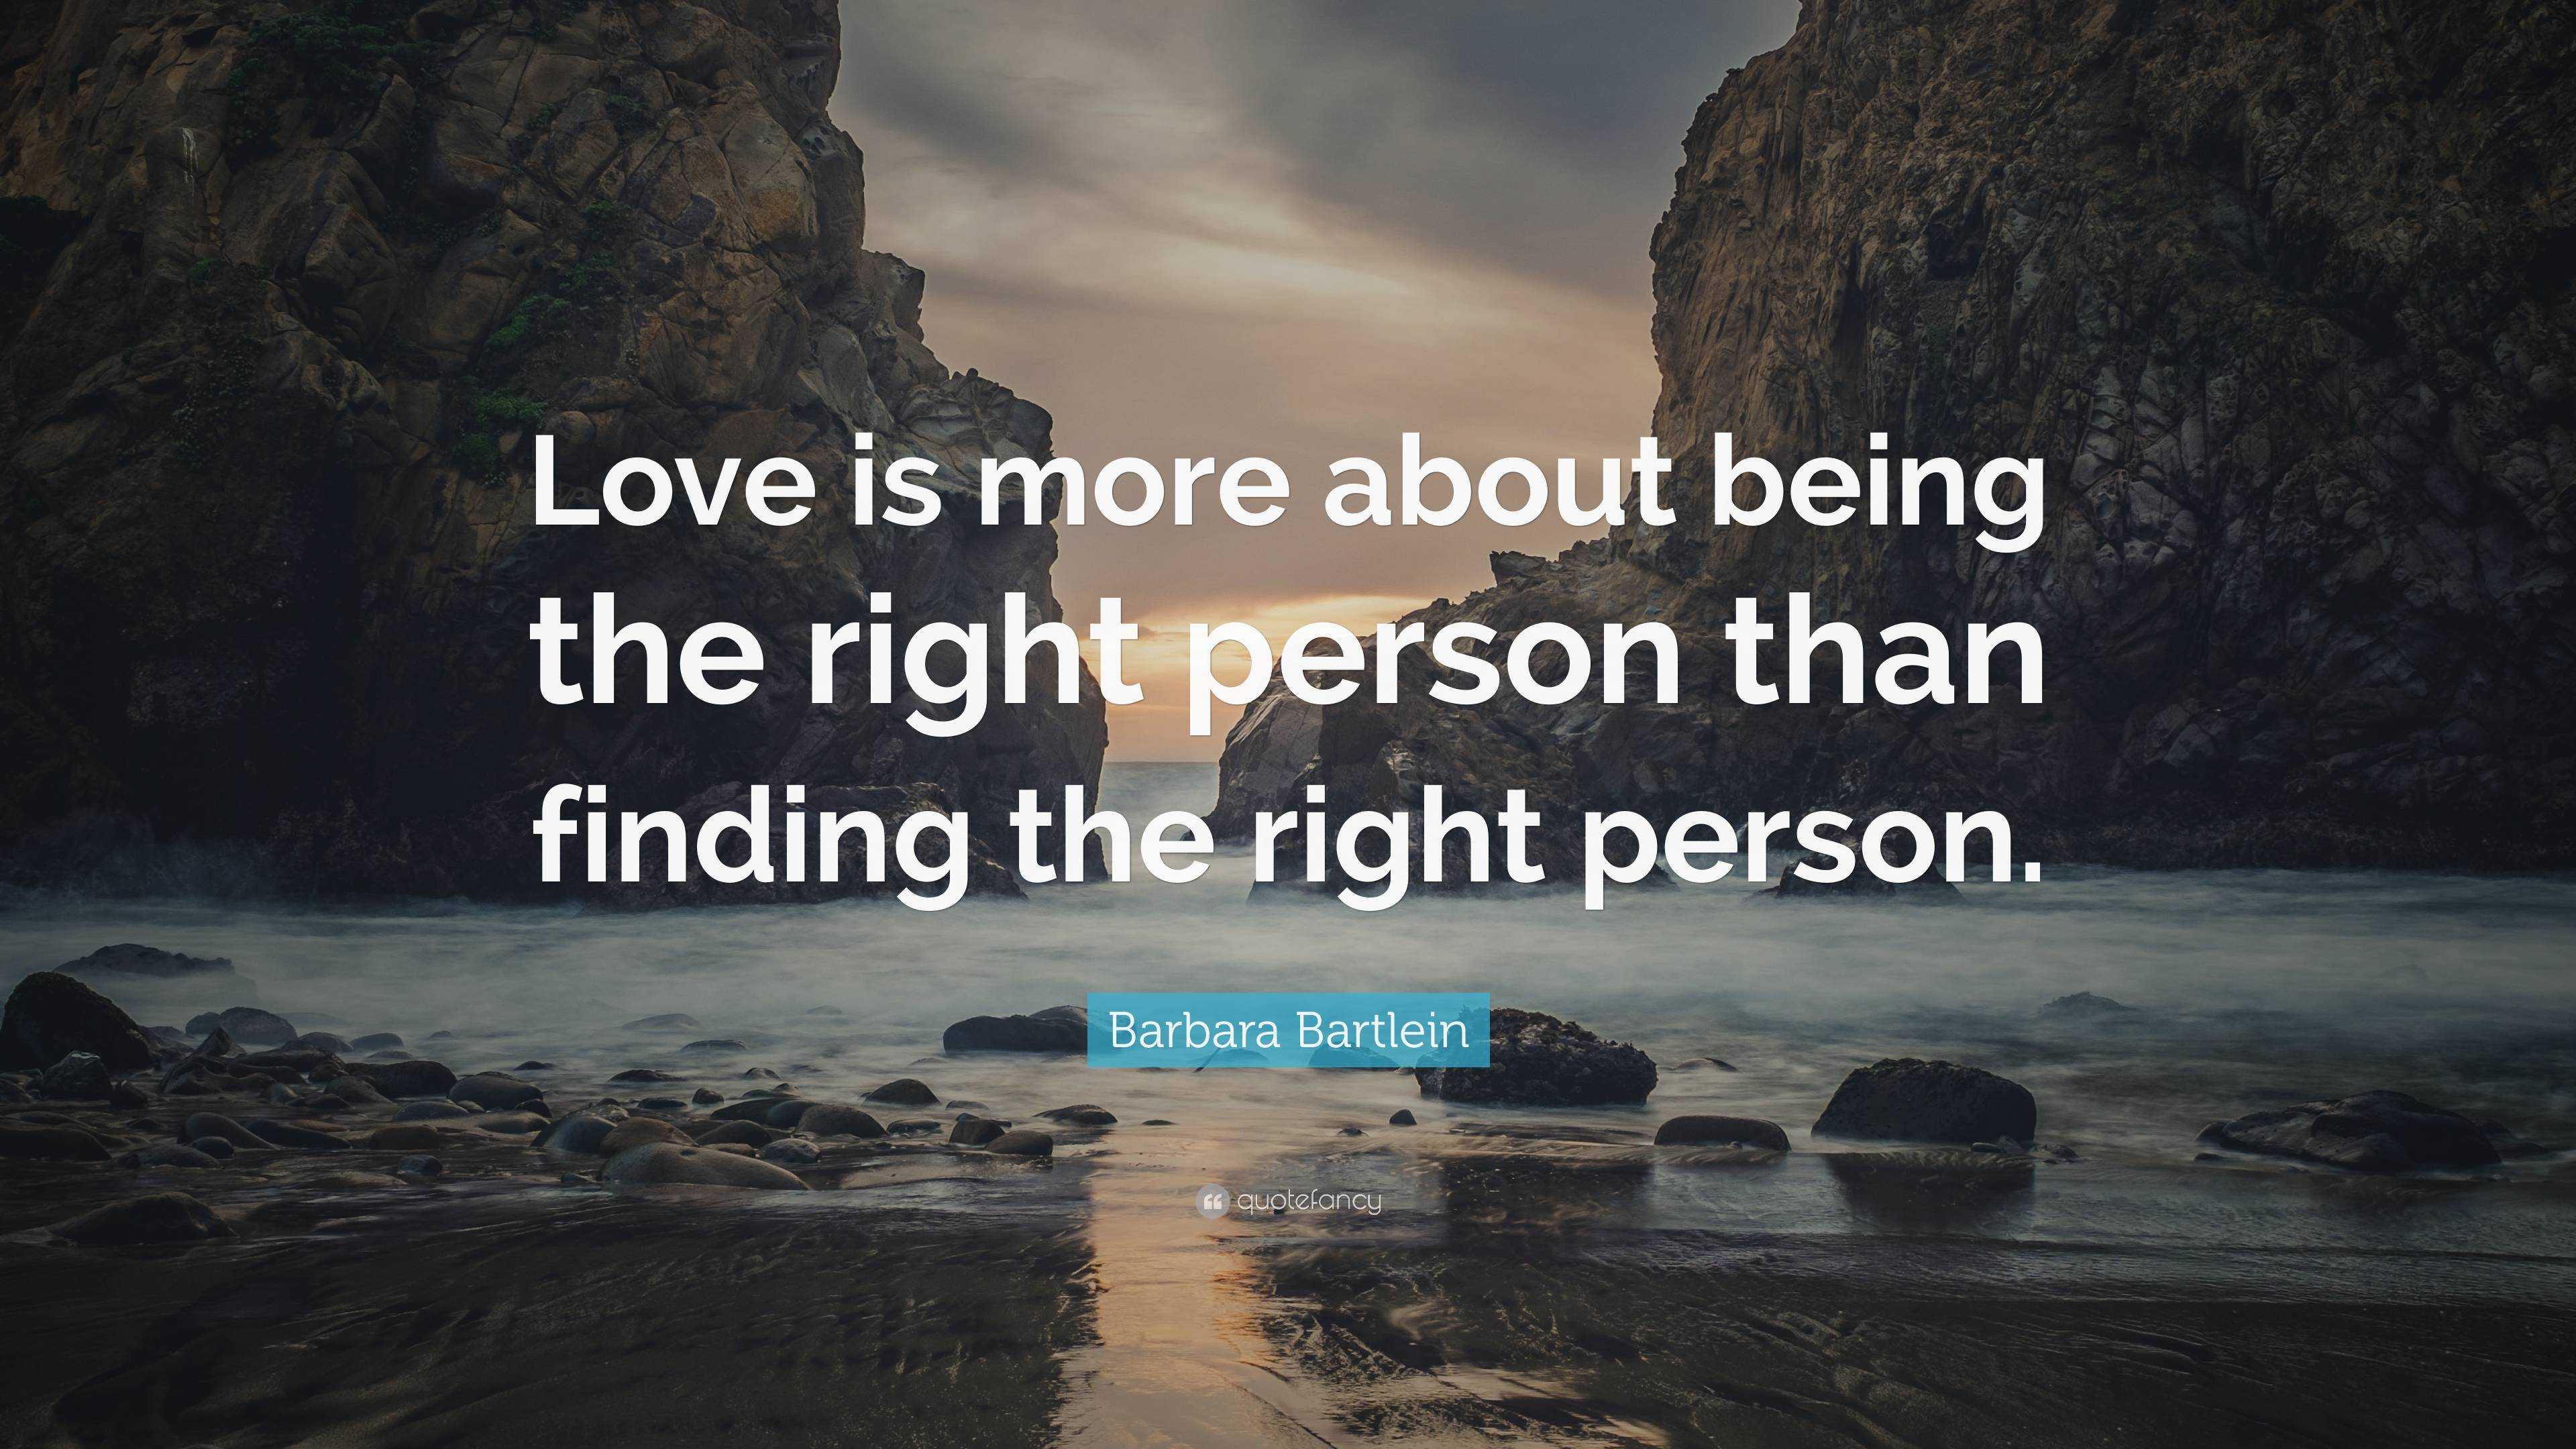 Barbara Bartlein Quote “love Is More About Being The Right Person Than Finding The Right Person ”